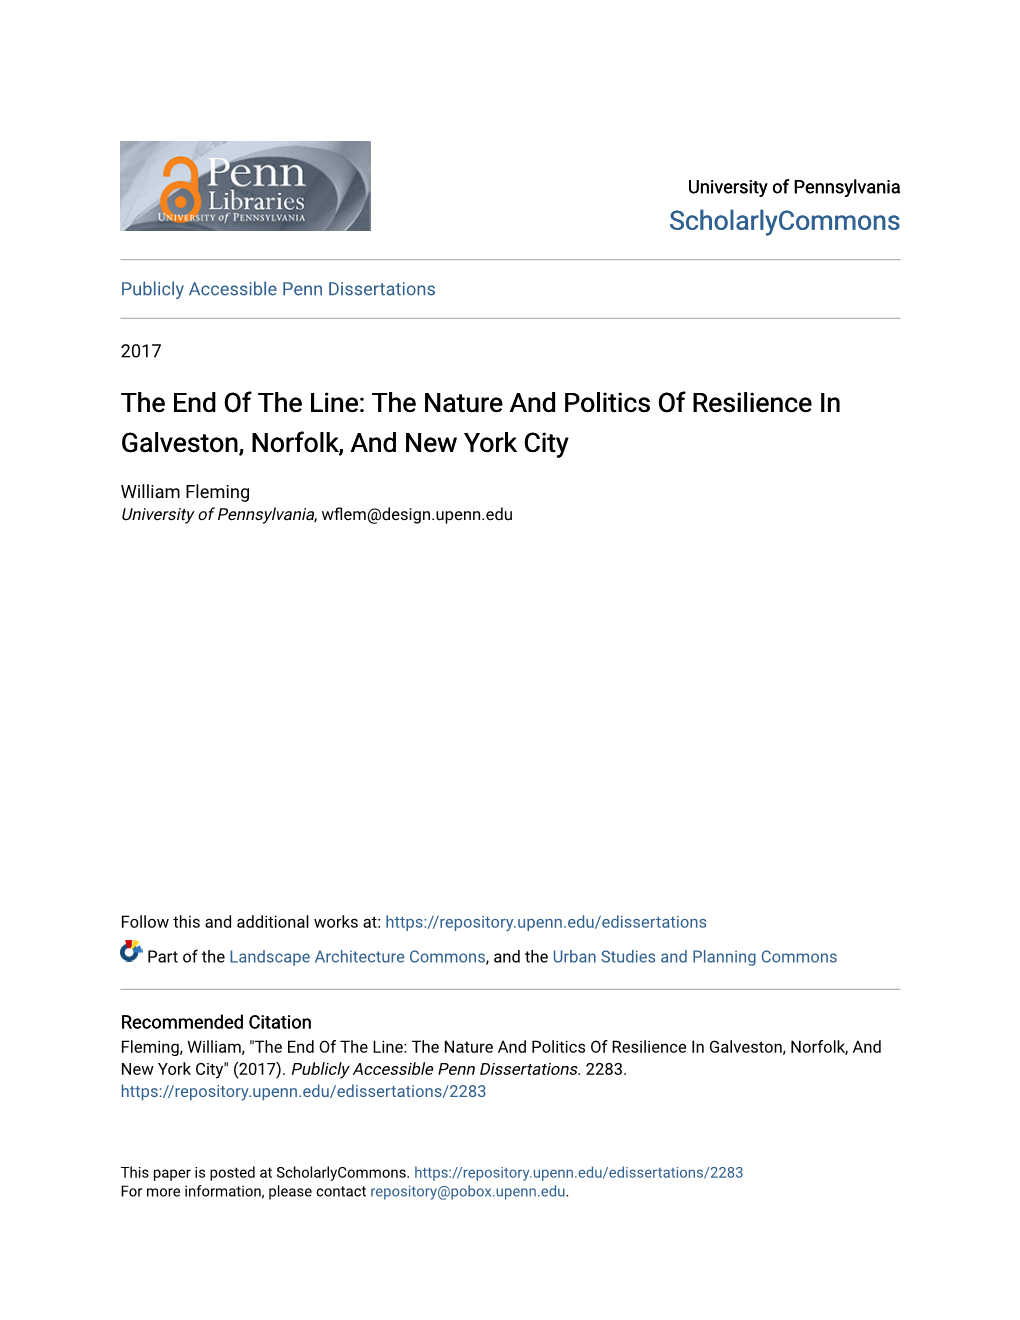 The End of the Line: the Nature and Politics of Resilience in Galveston, Norfolk, and New York City